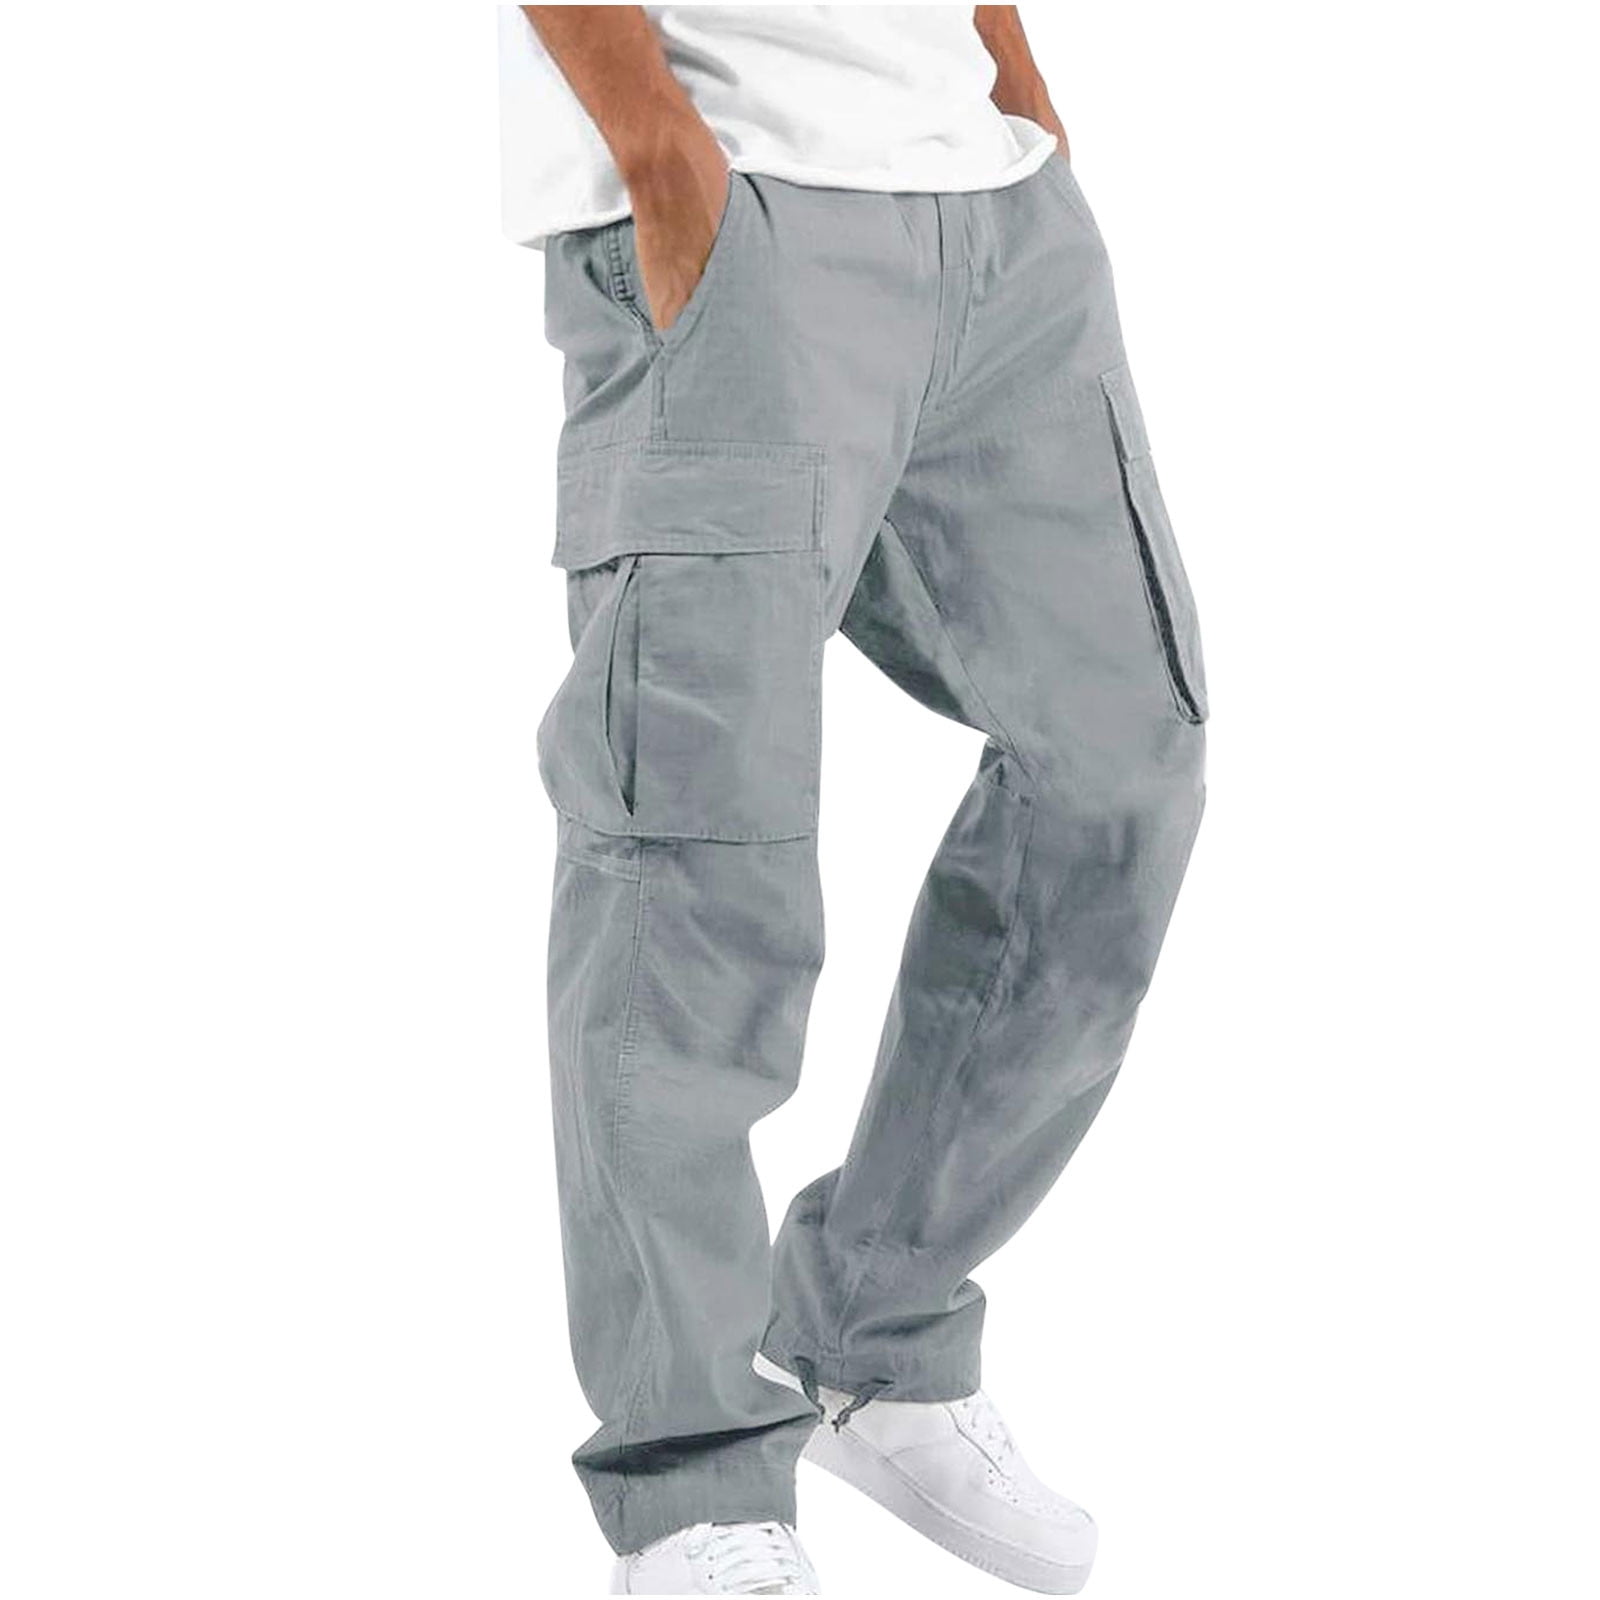 Men Dirty Laundry Cargo Trousers - Grey